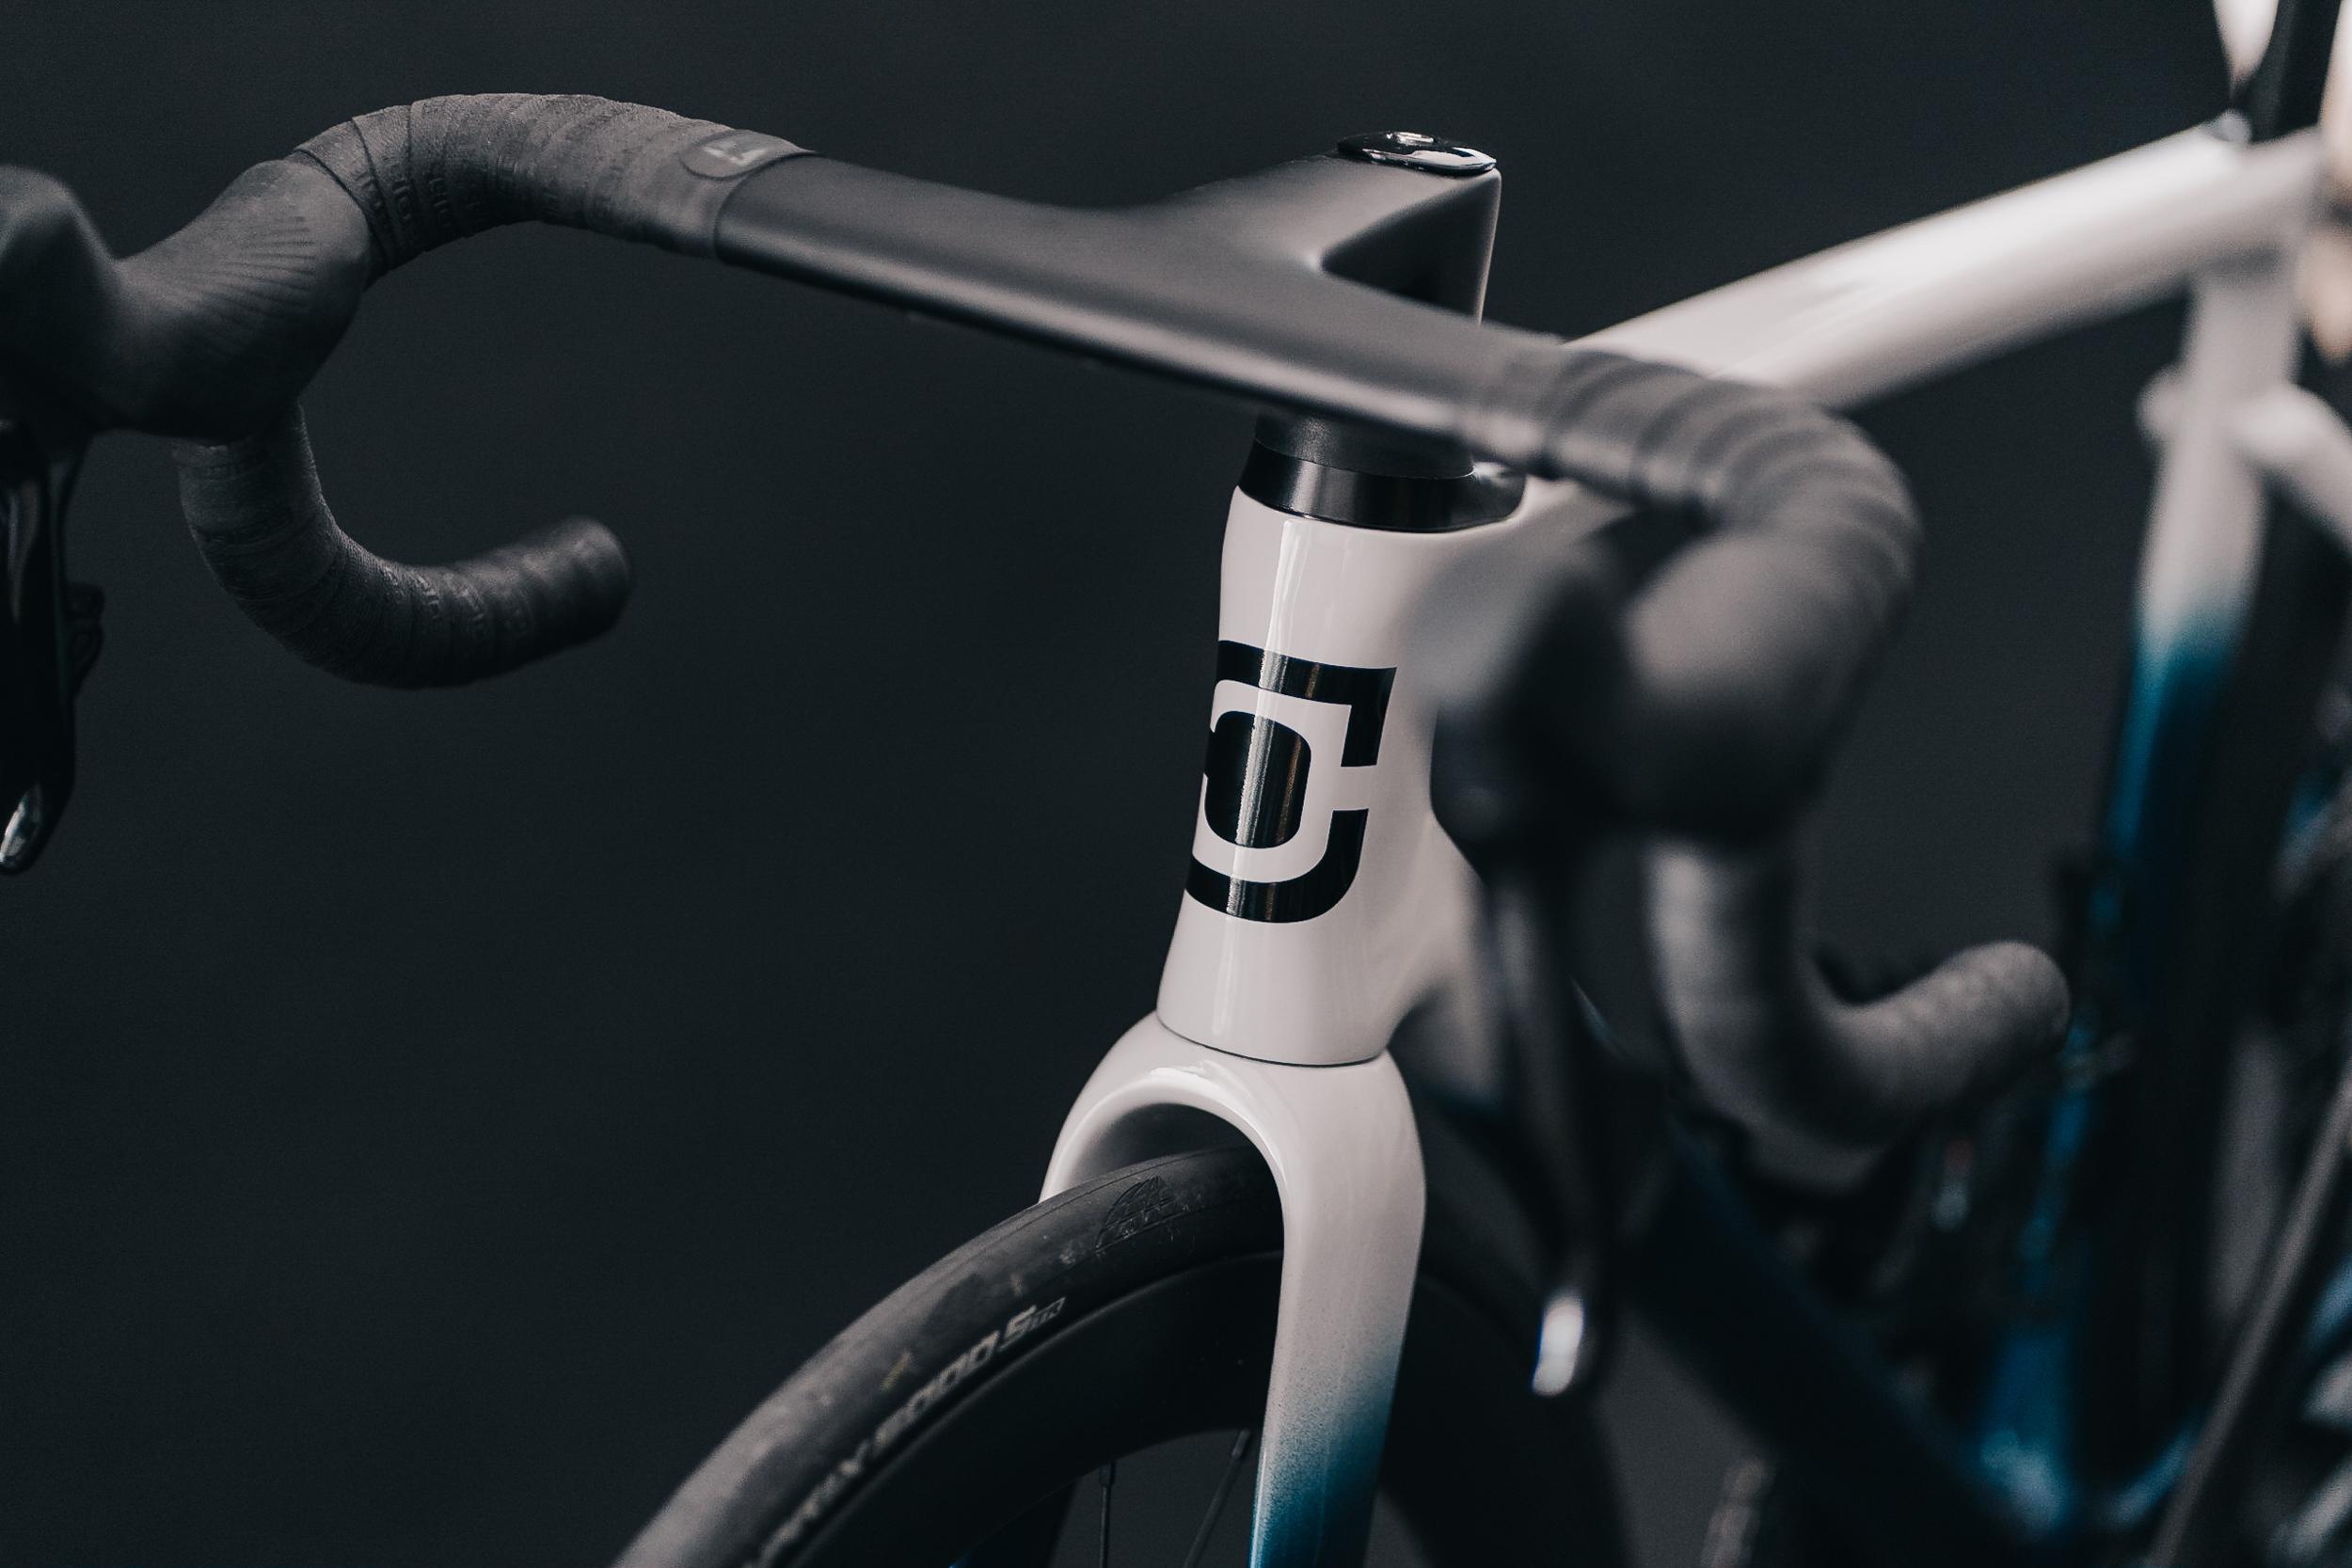 Experience the ultimate synergy between performance and style with our Carbon finishing kit. Crafted with the same meticulous attention to detail as our frames, this high-quality kit is manufactured in the same factory to ensure consistency and excellence.